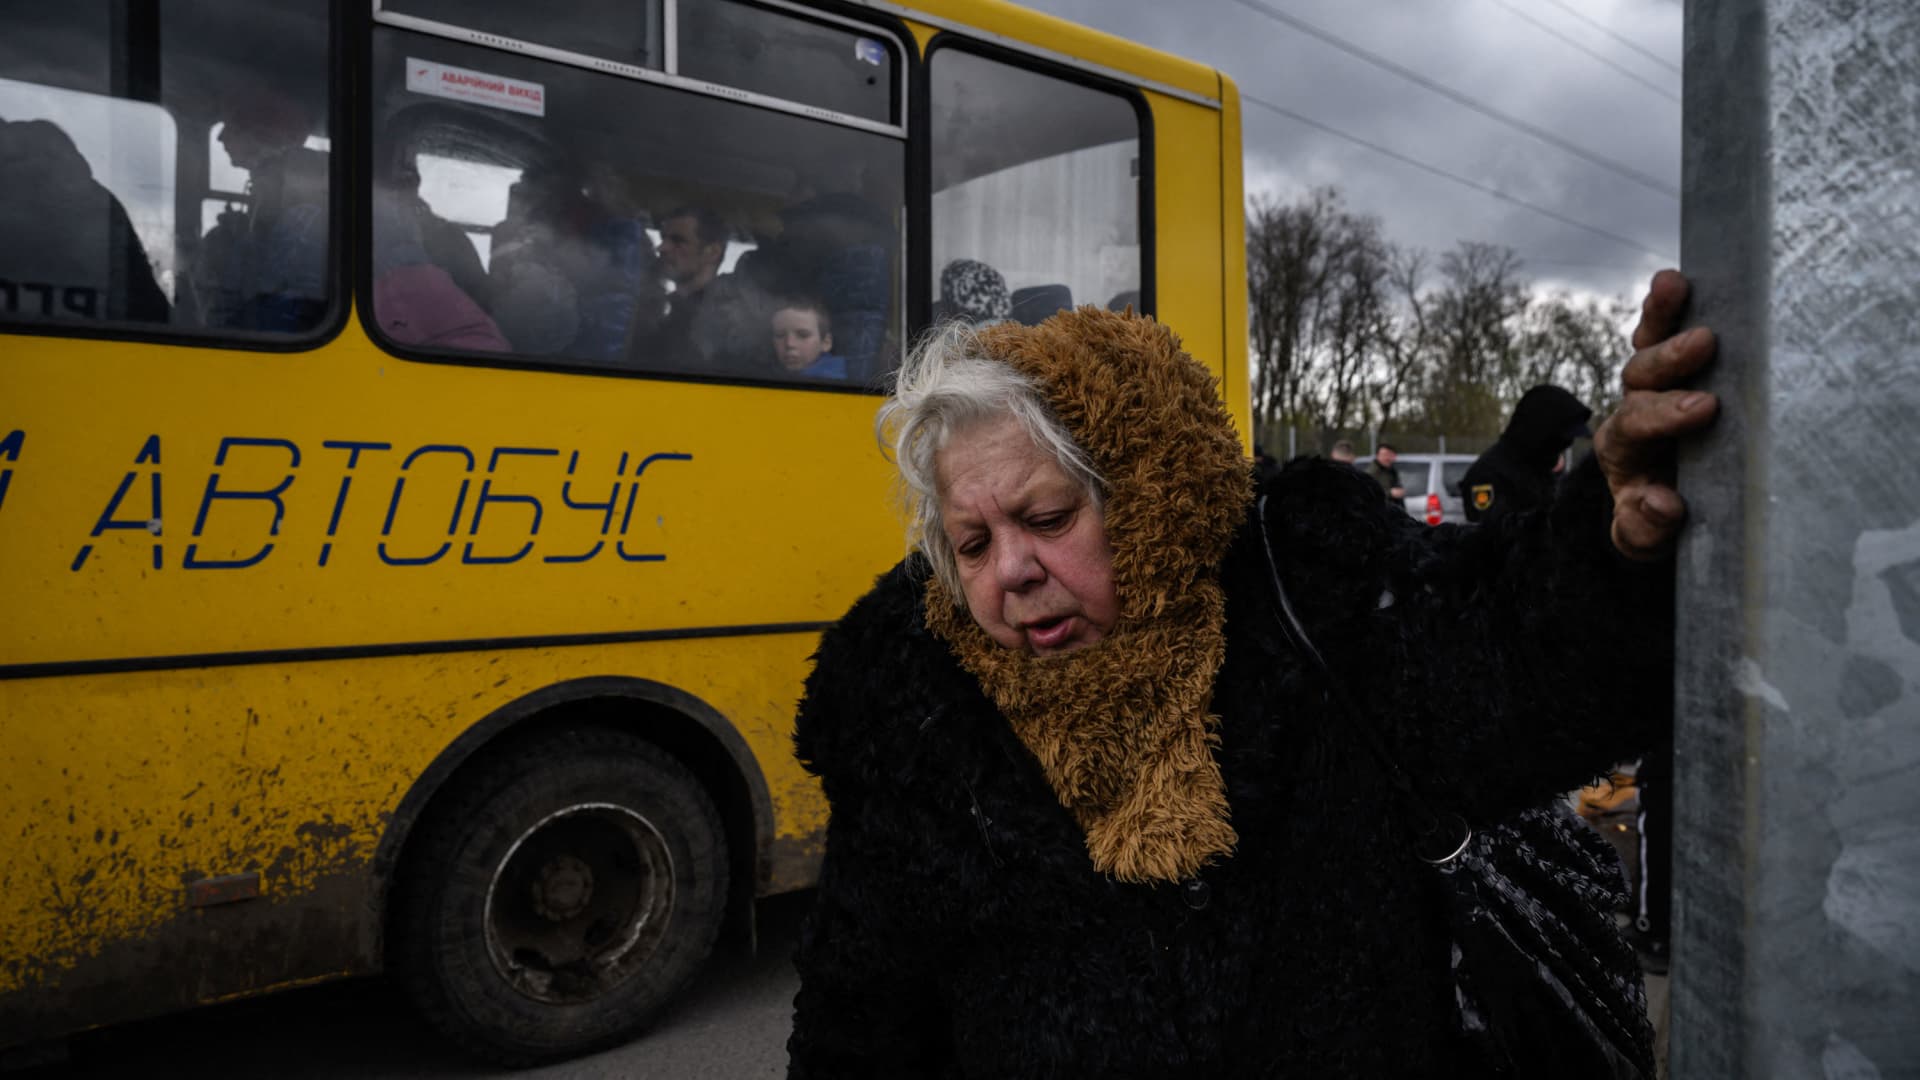 People fleeing fighting in the southern city of Mariupol meet with relatives and friends as they arrive in a small convoy after the opening of a humanitarian corridor, at a registration center for internally displaced people in Zaporizhzhia on April 21, 2022.